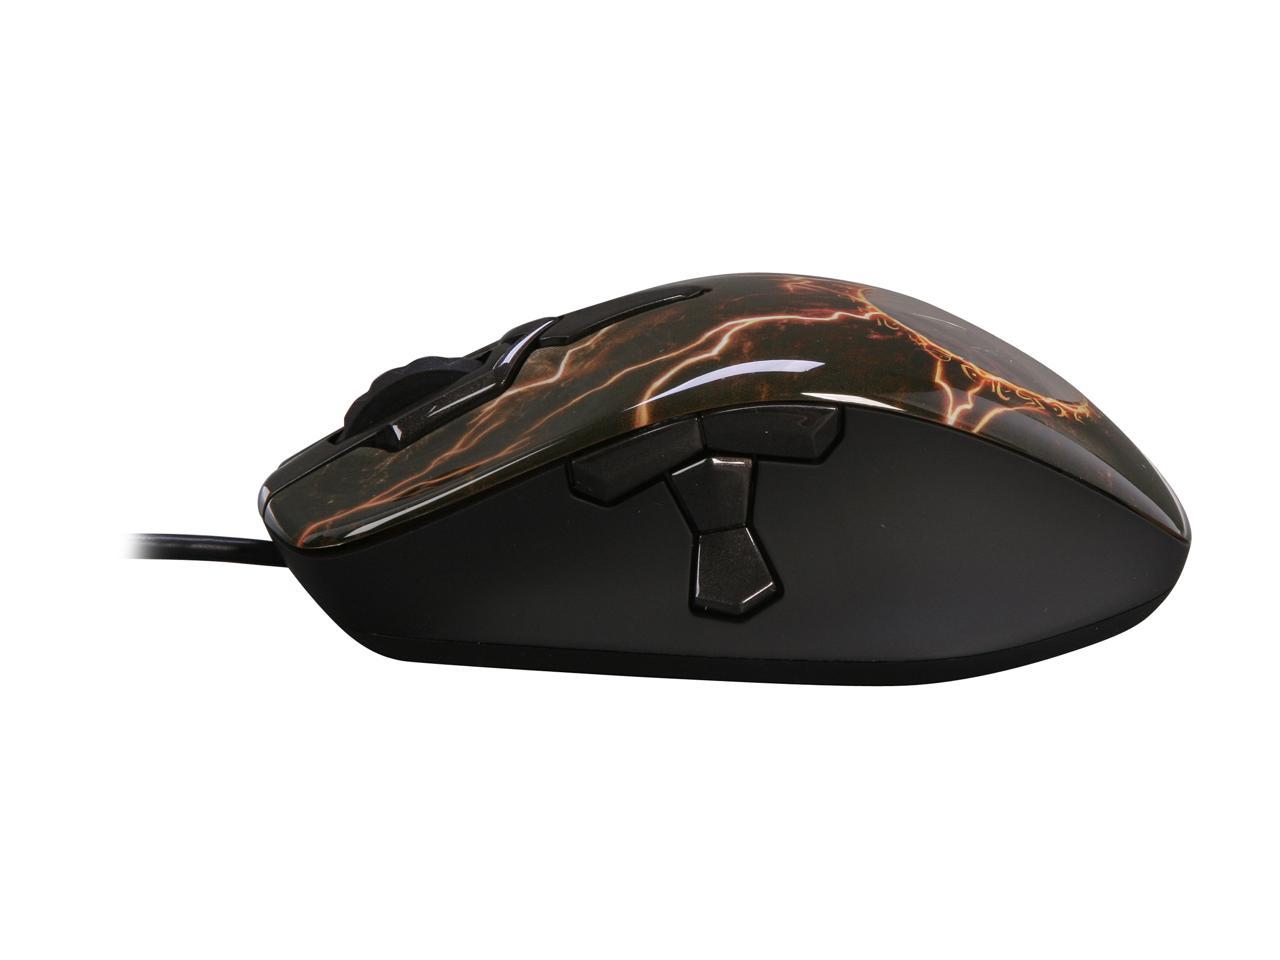 steelseries wow mouse special edition